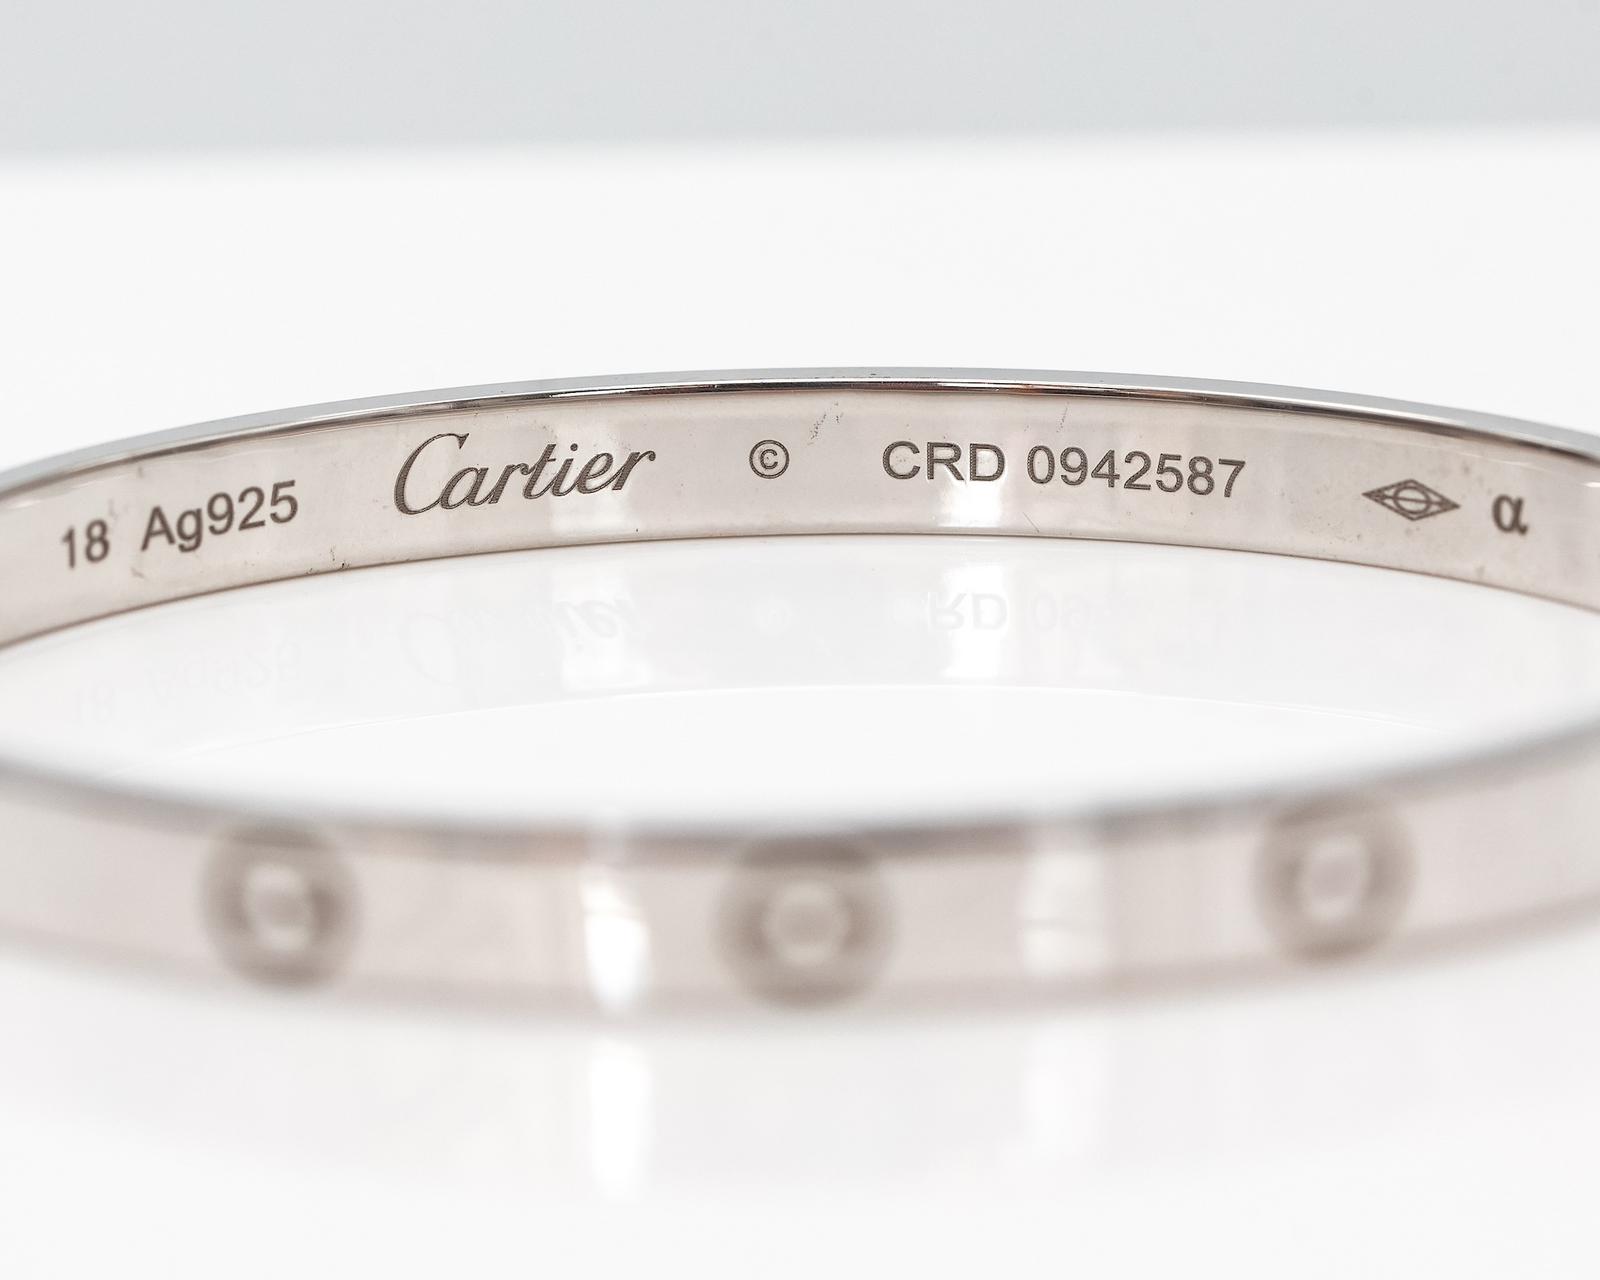 CARTIER Style silver hinge bangle | OldJW Auctioneers